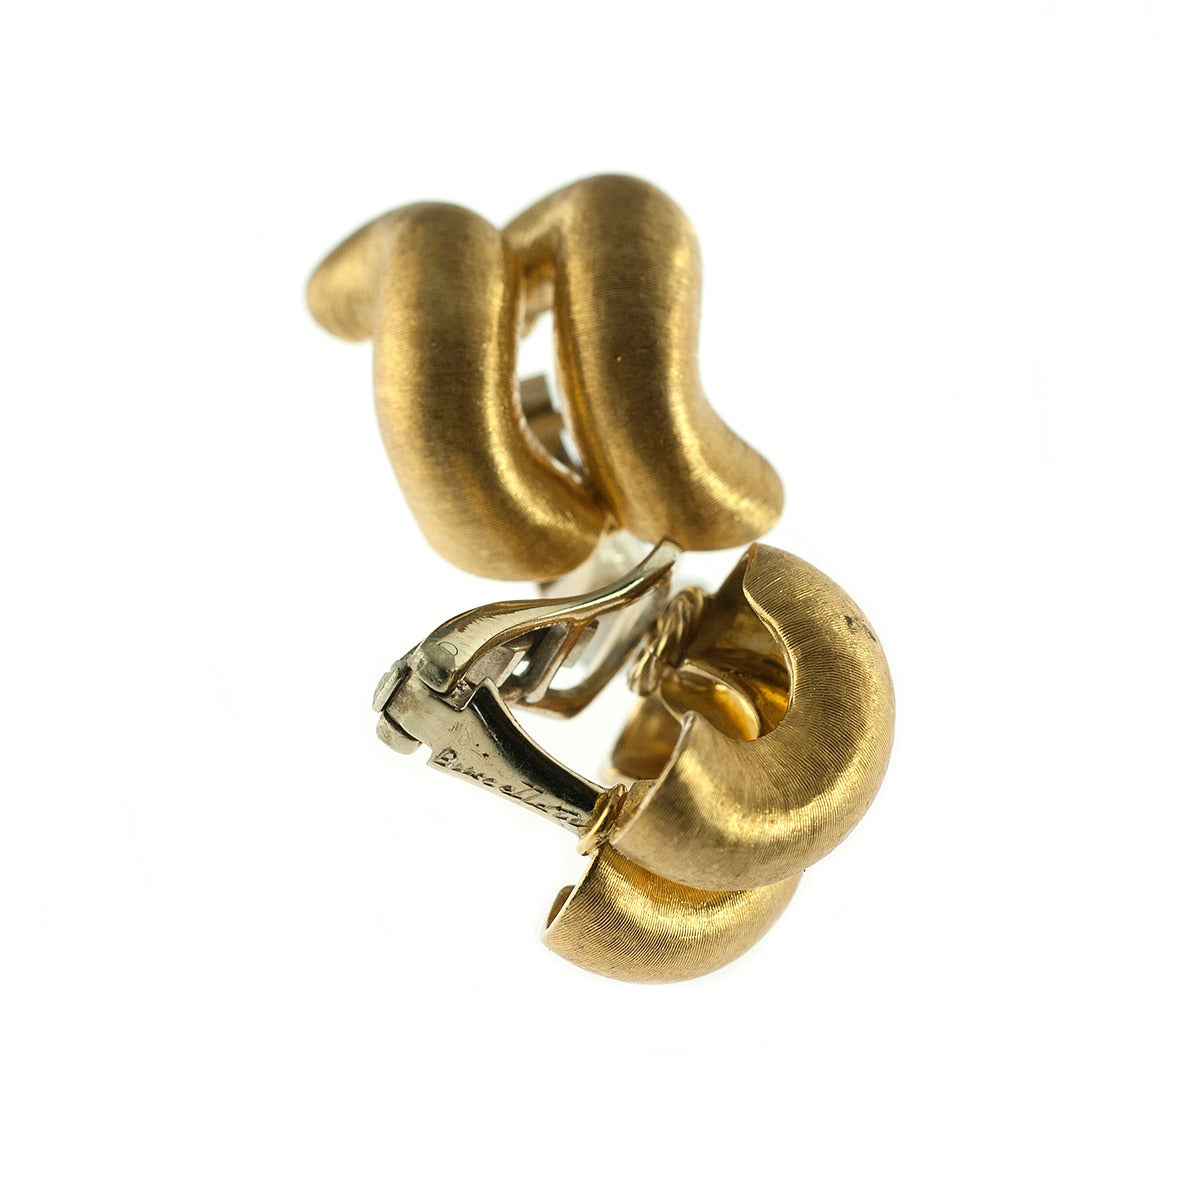 A stylish pair of Buccellati earrings. The 5/8